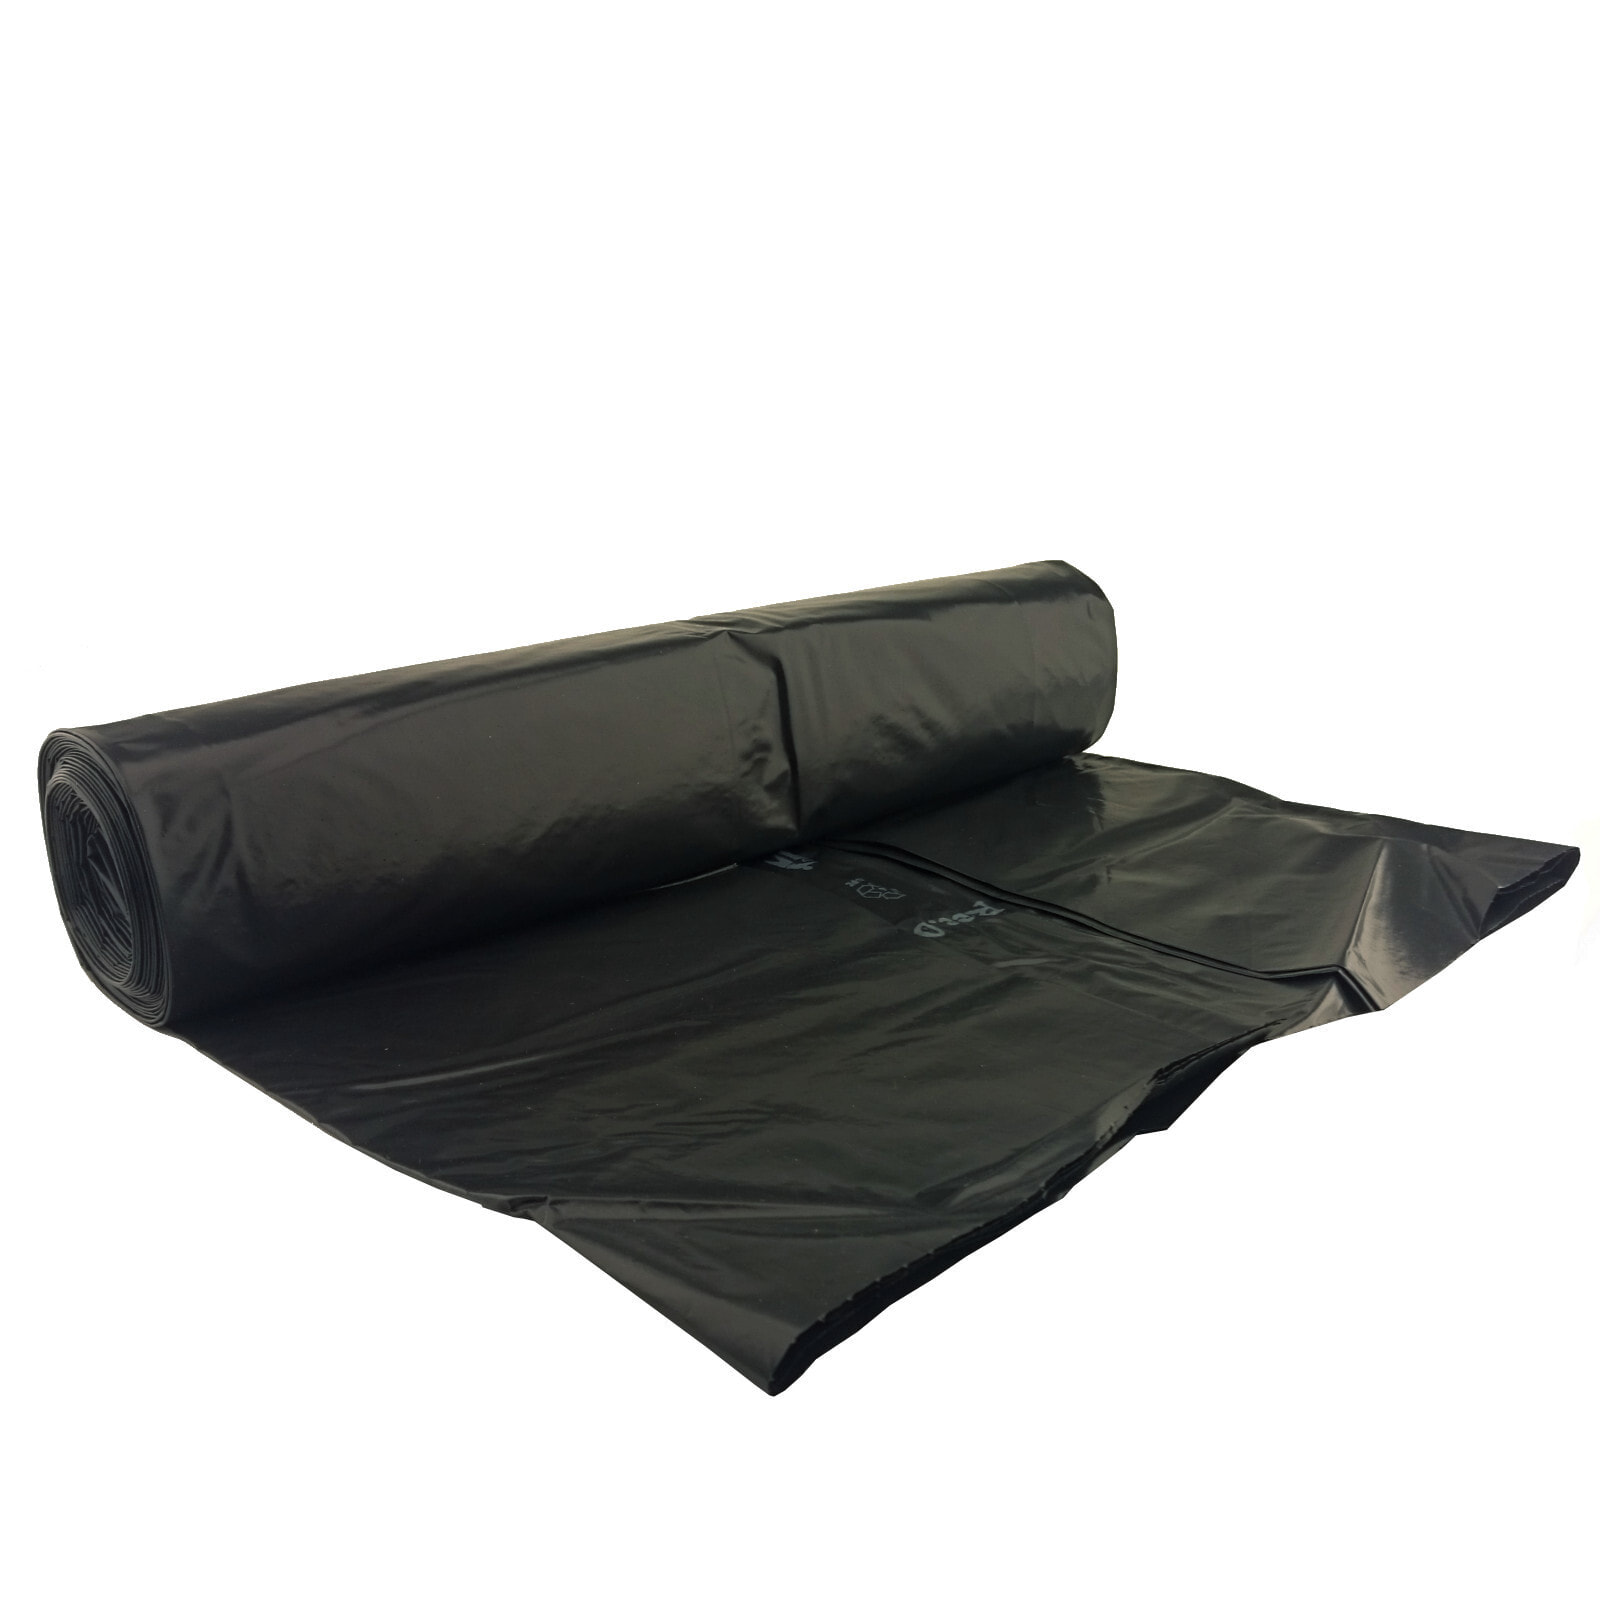 80 micron thick garbage bags. durable roll 15 pcs. - black 120L